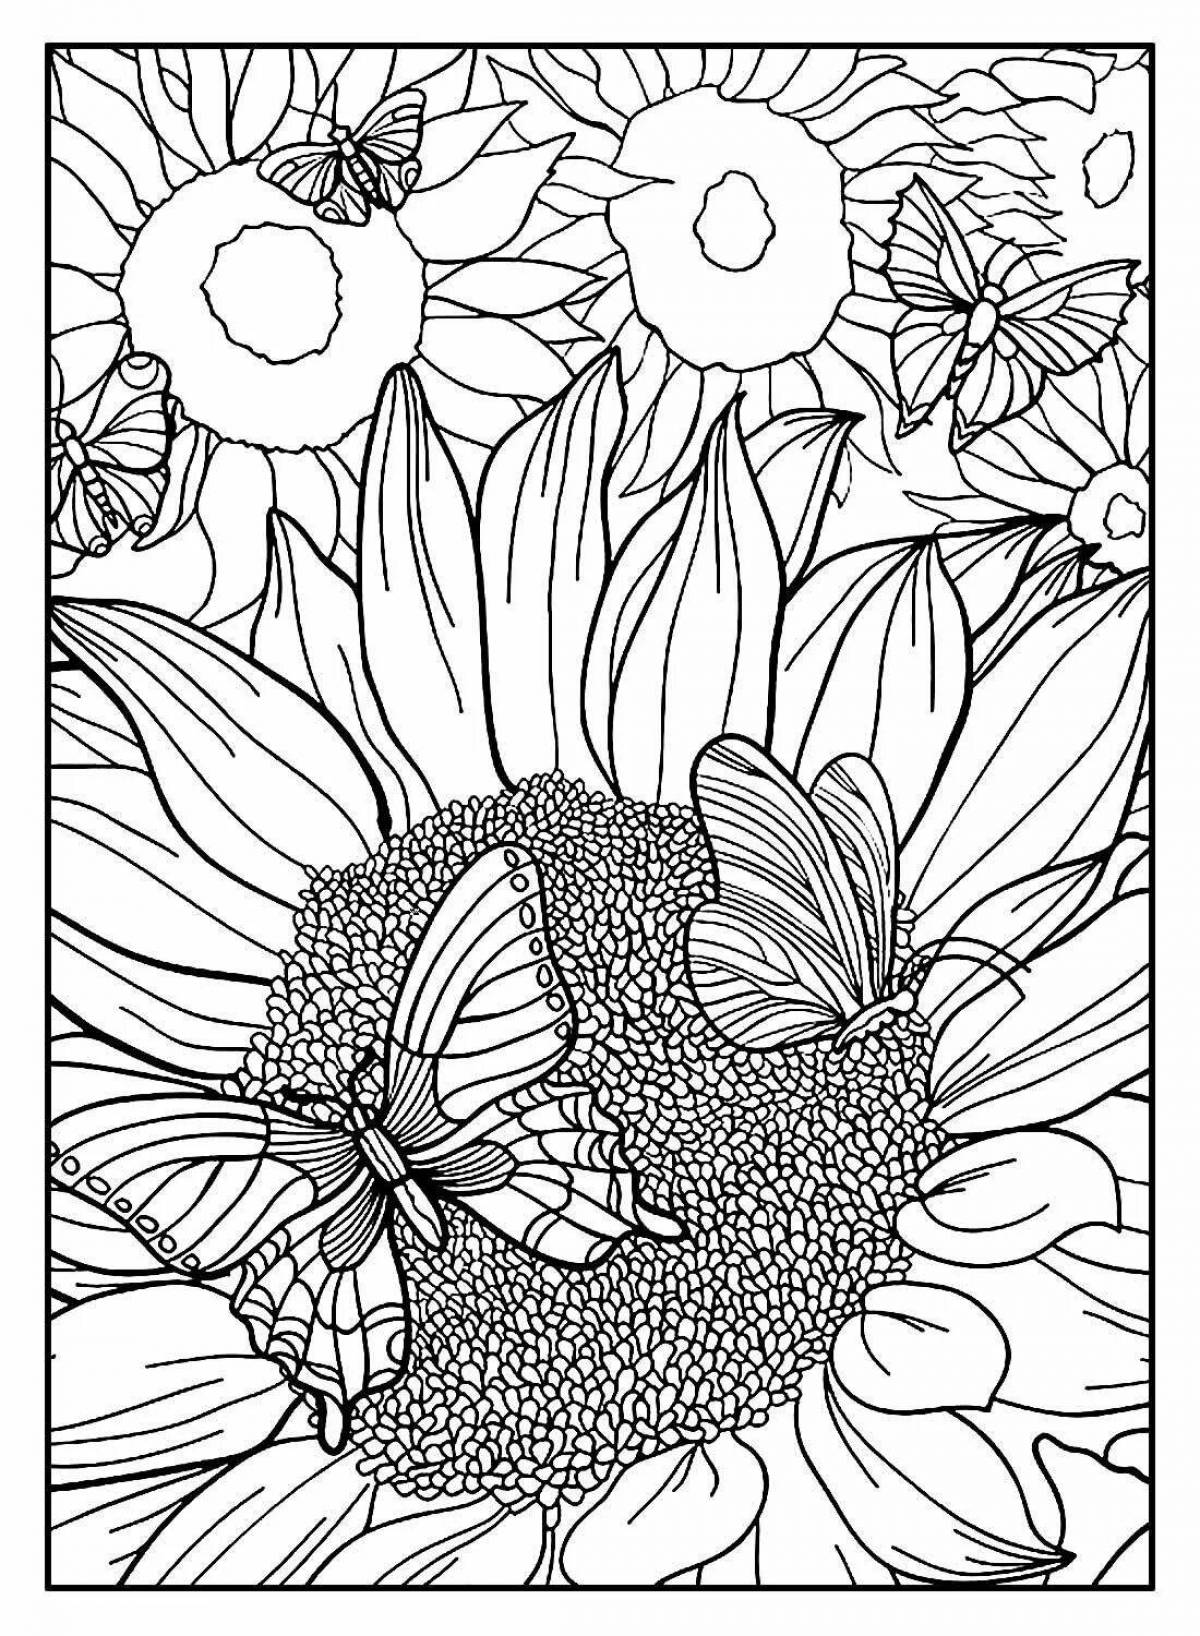 Coloring page of complex intricate paints